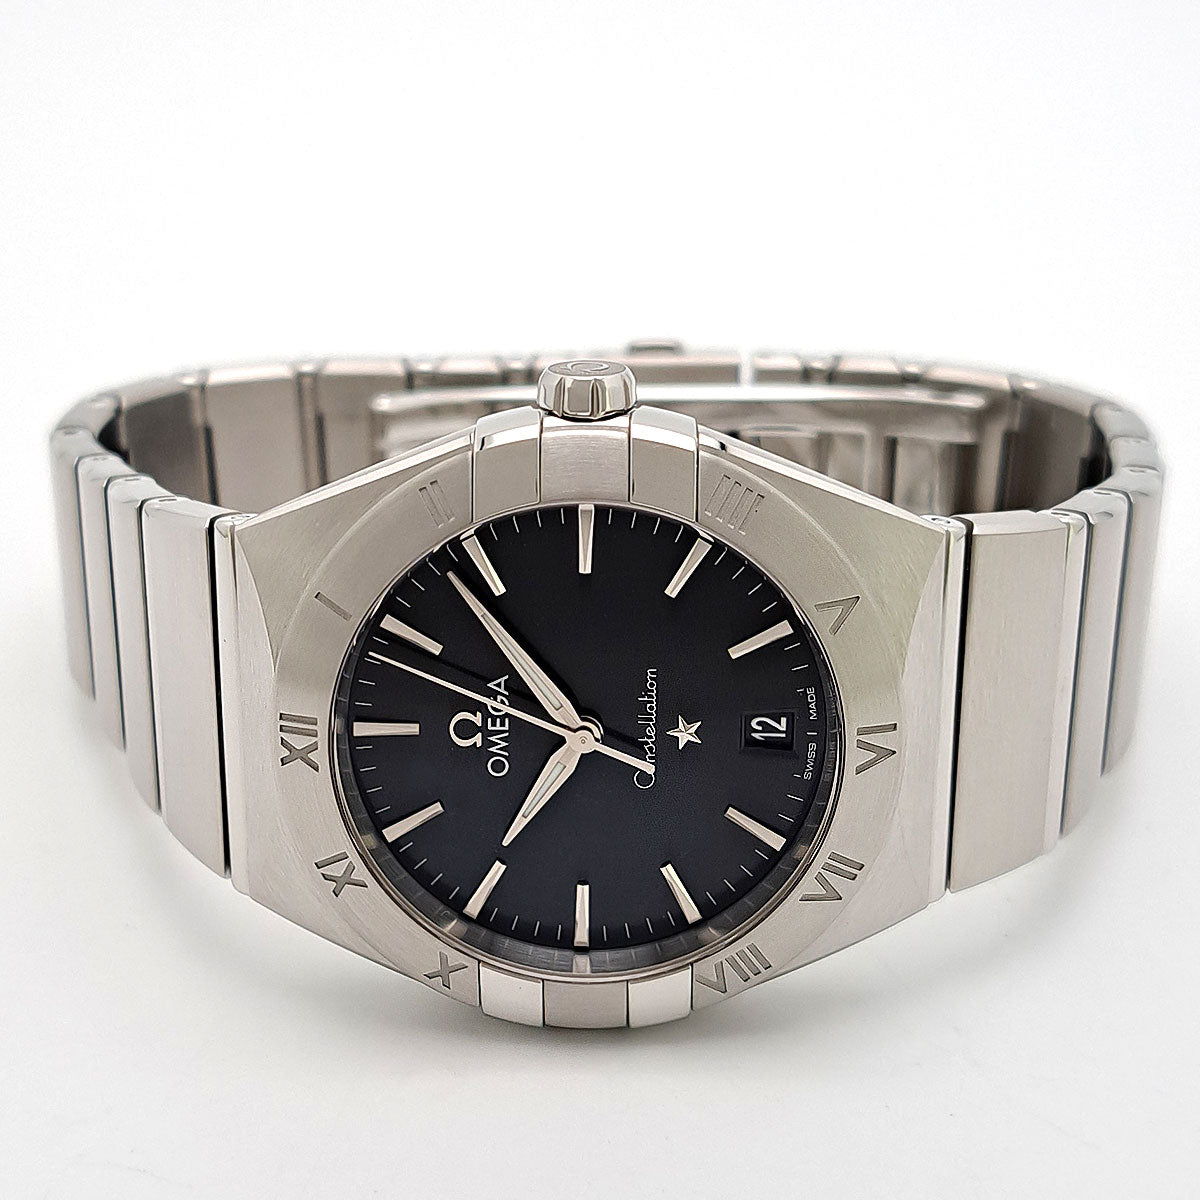 OMEGA Constellation-36mm 131.10.36.60.01.001 Quartz Stainless Steel Men's Watch (Pre-Owned) 131.10.36.60.01.001